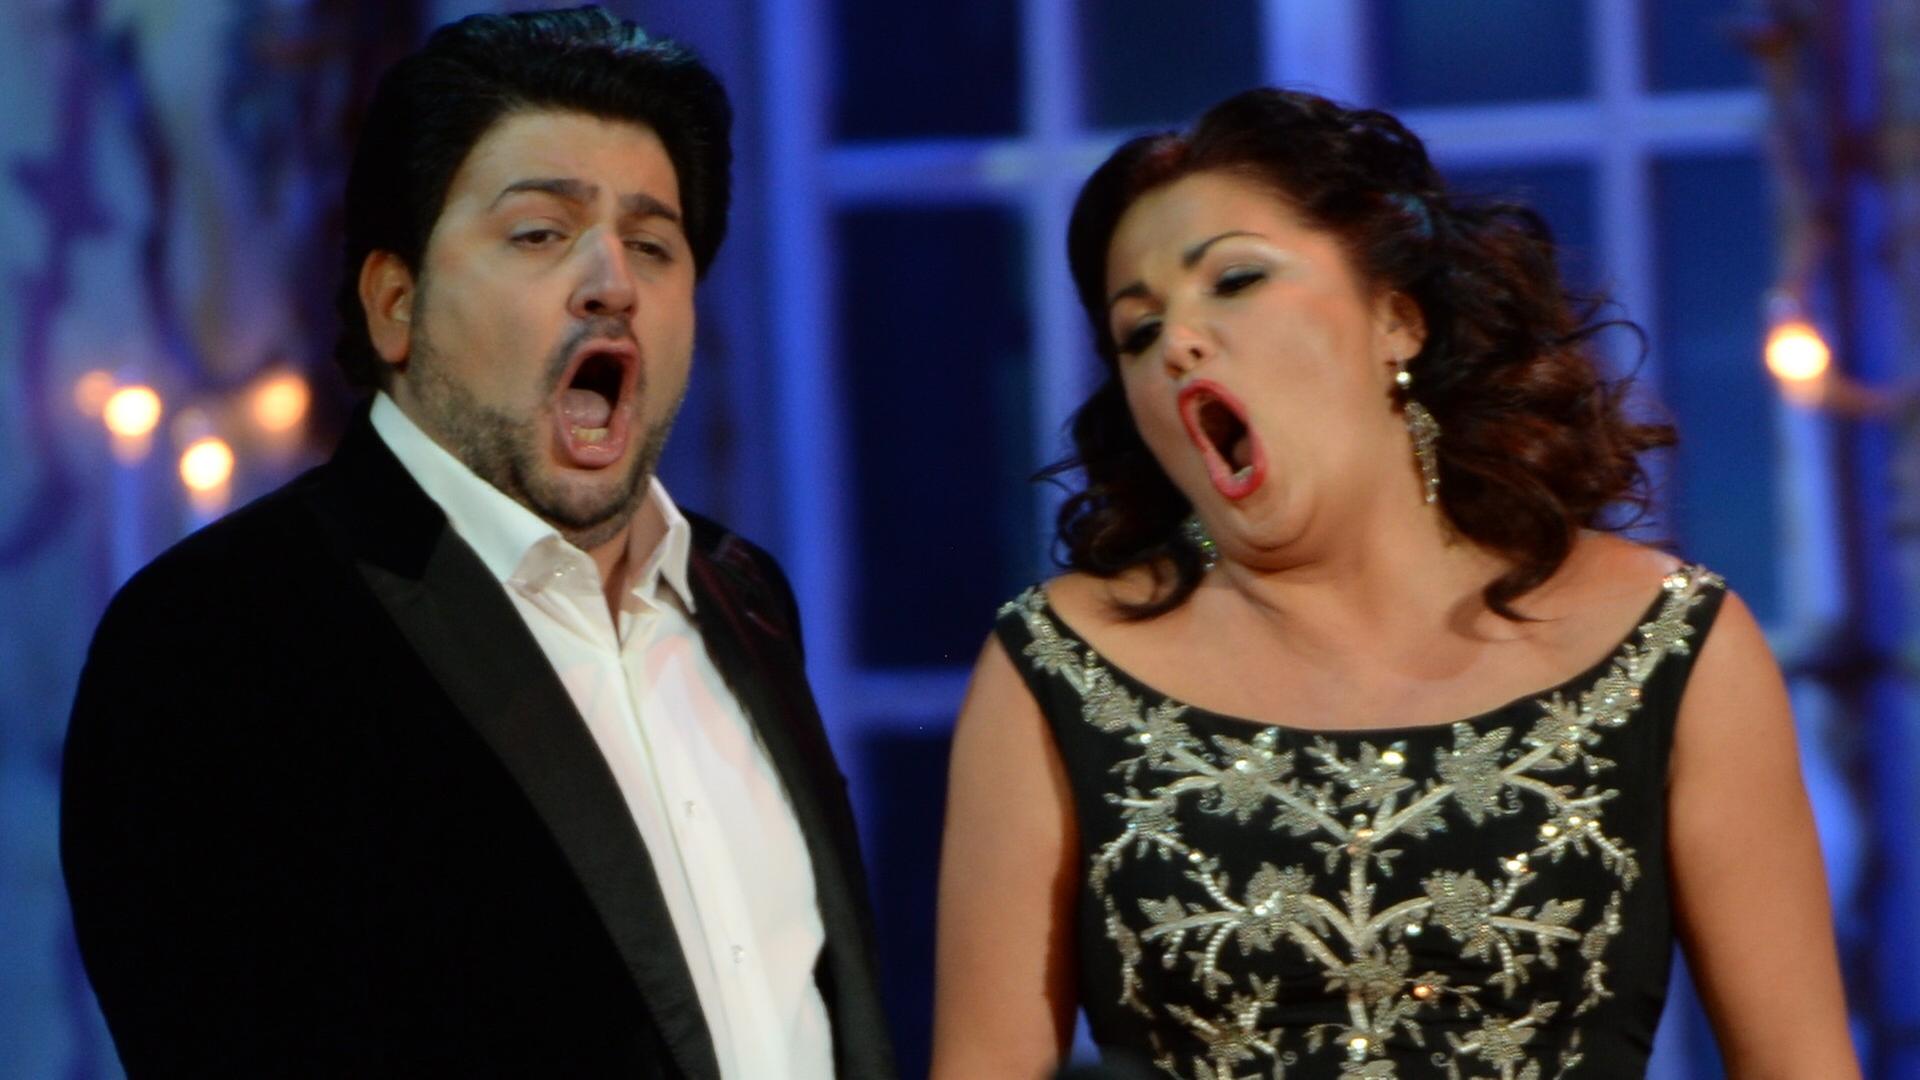 Opera singers Yusif Eivazov and Anna Netrebko perform at the Opera Ball concert dedicated to People's Artist of the USSR Yelena Obraztsova's 75th birthday on october 28th 2014. The concert took place at the State Academic Bolshoi Theatre in Moscow.